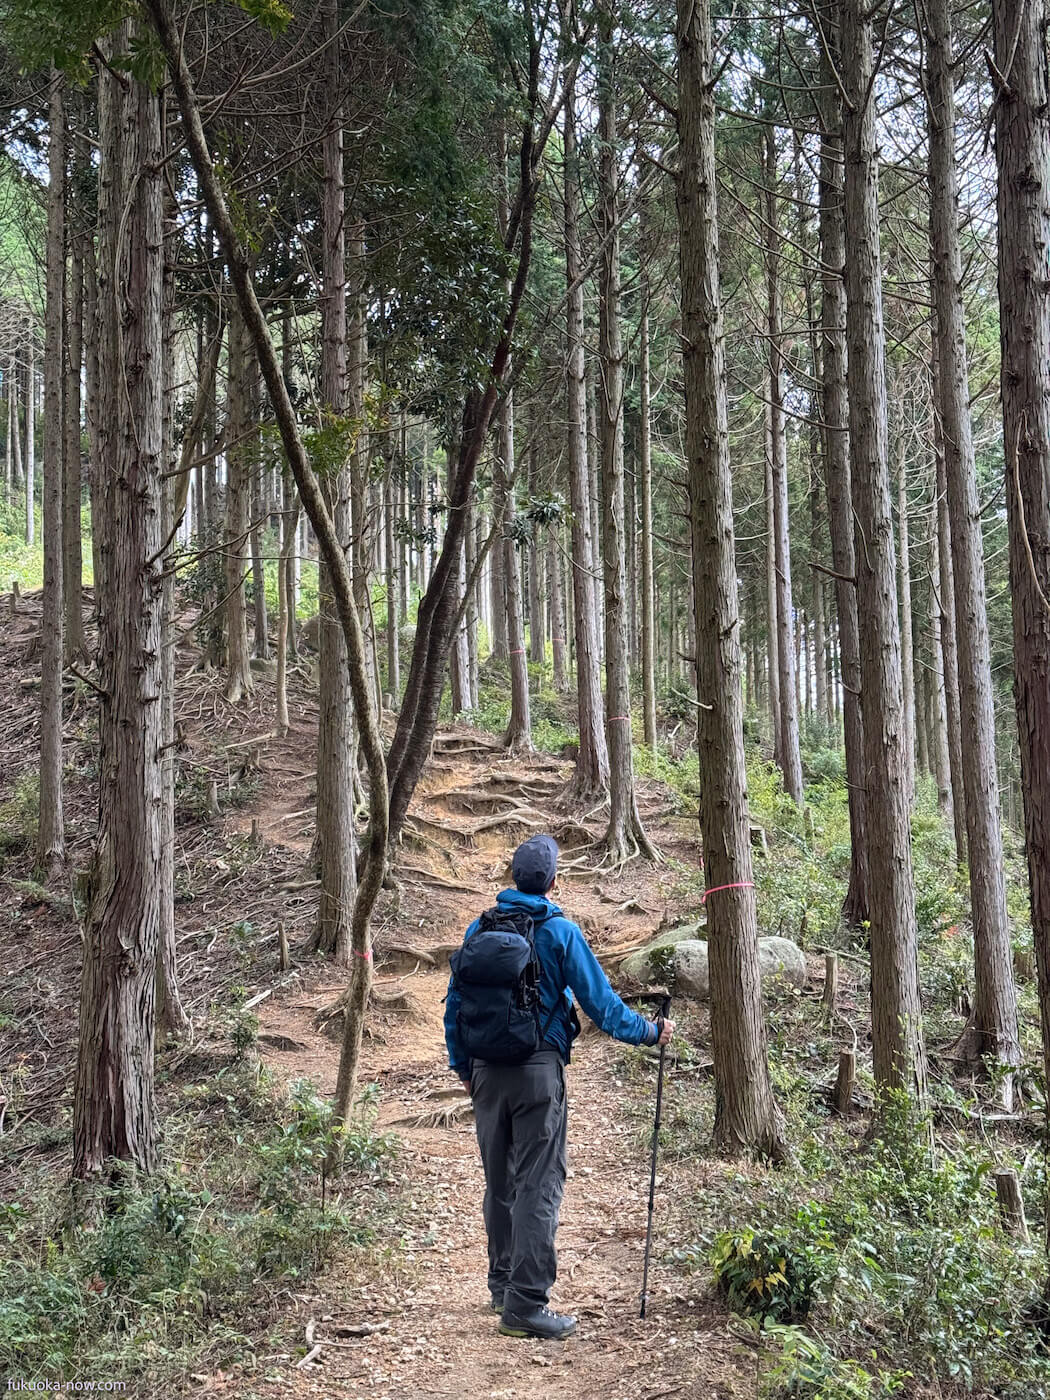 Itoshima's Best Hikes: Trails for Every Climber, 糸島の山を歩いて絶景を見にいこう